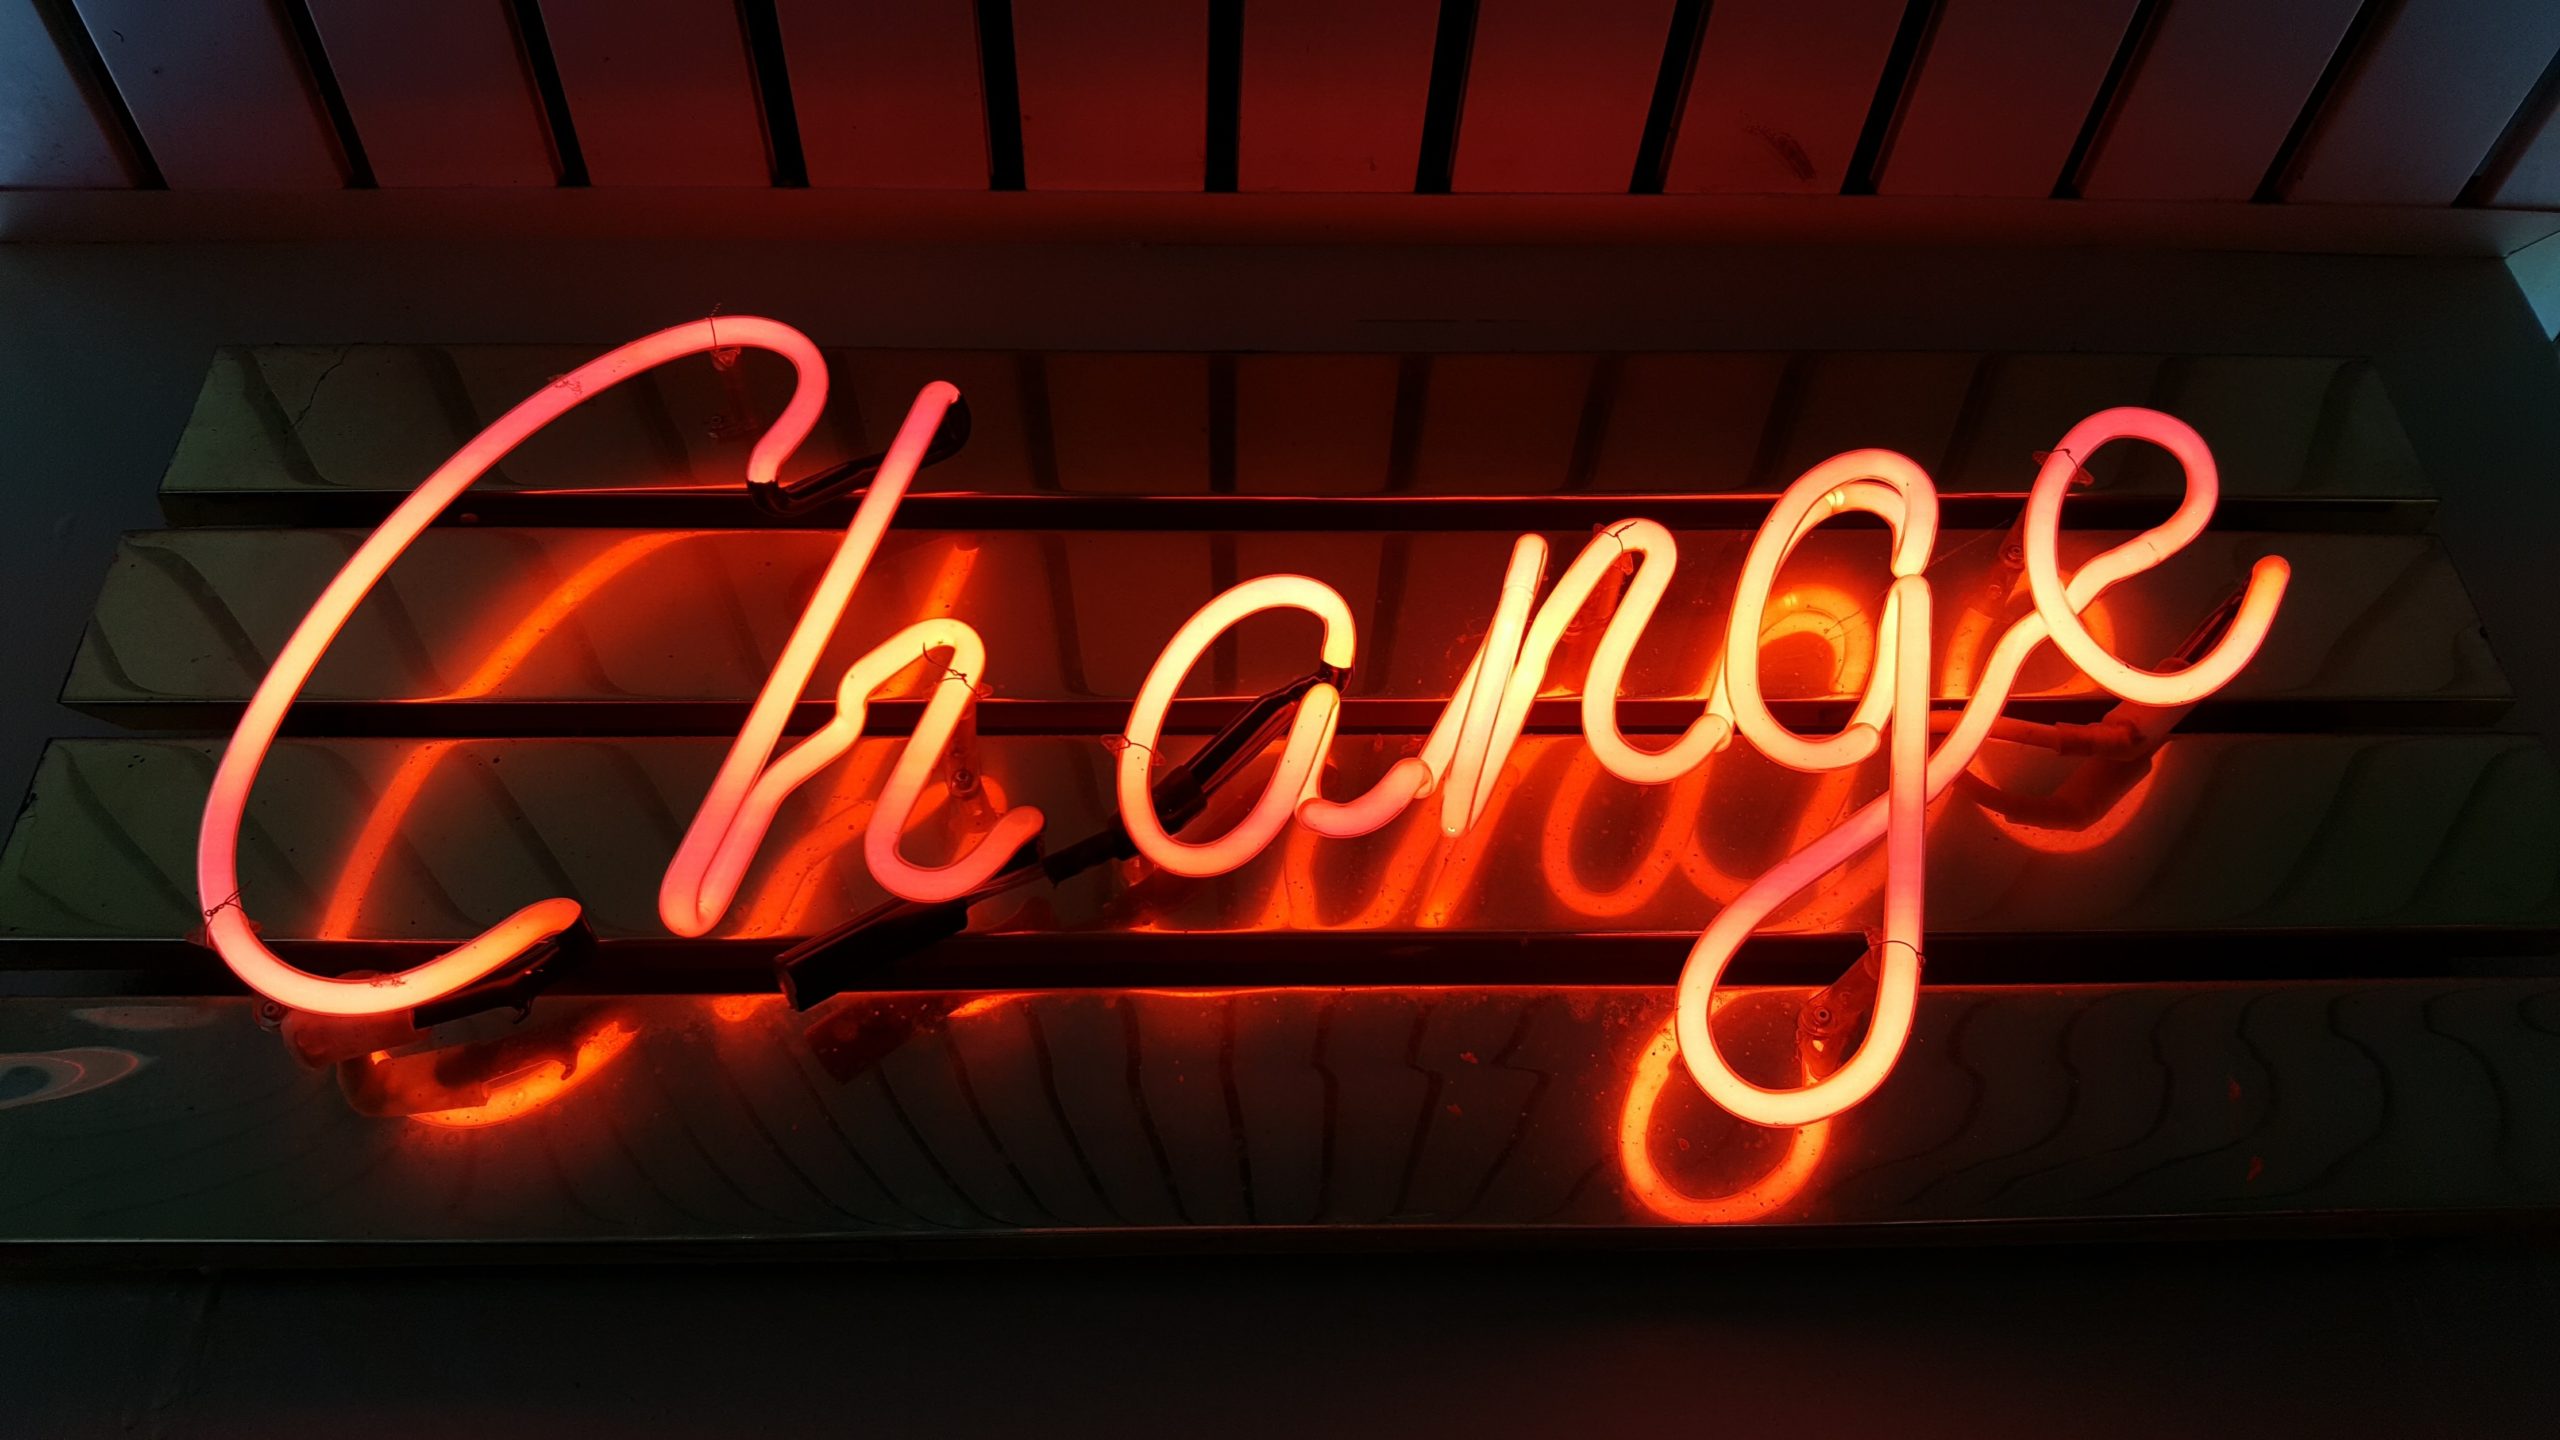 Neon sign that reads "Change"